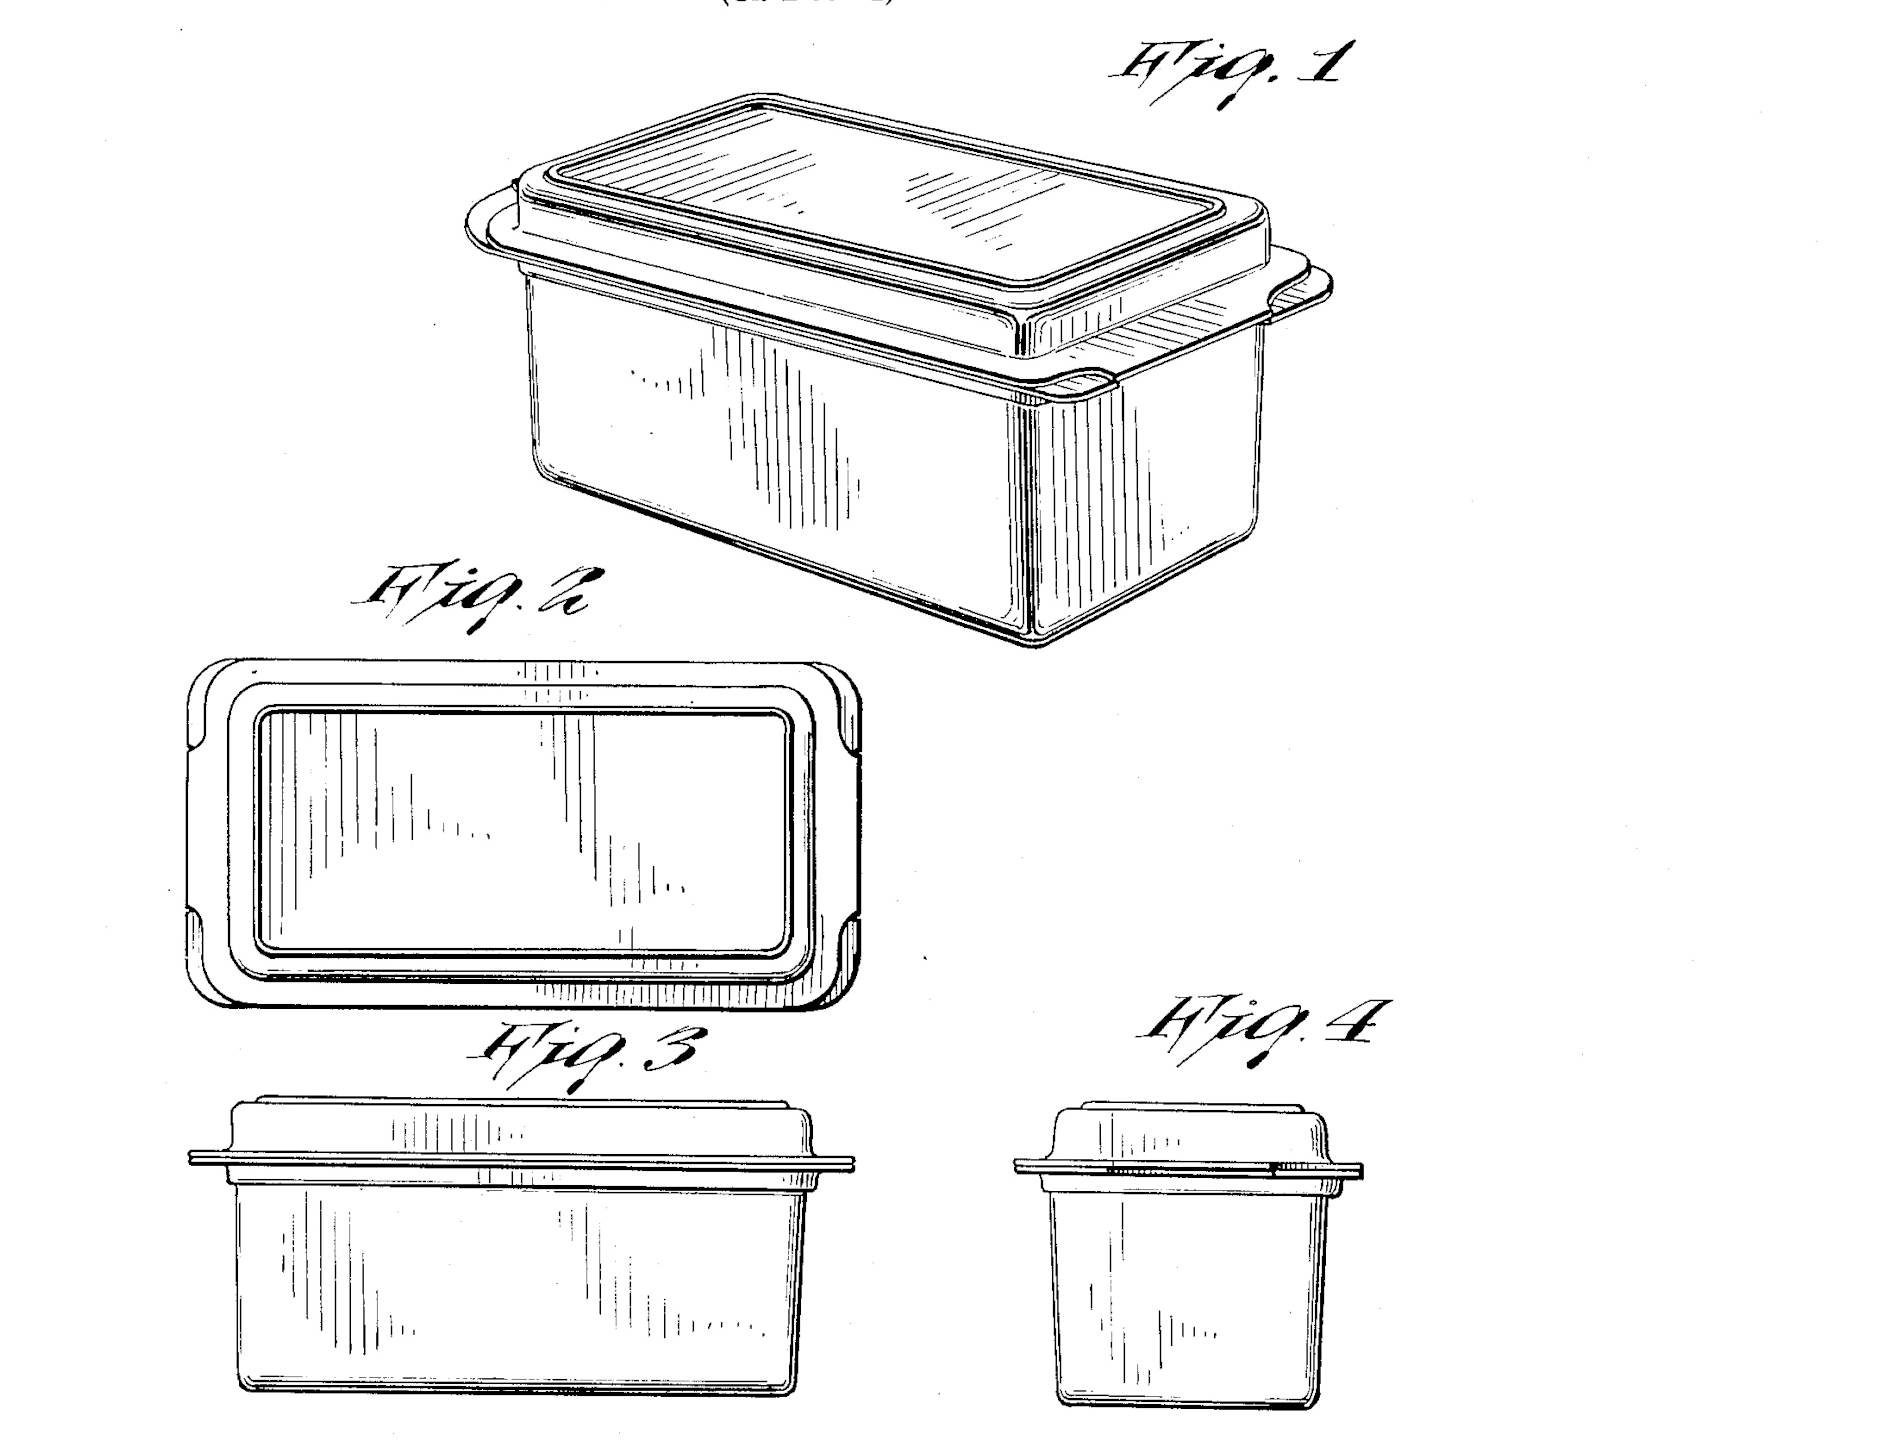 Food Storage Container, Earl S. Tupper, 1954/1955. Patent Number: USD 175,202, U.S. Patent Office